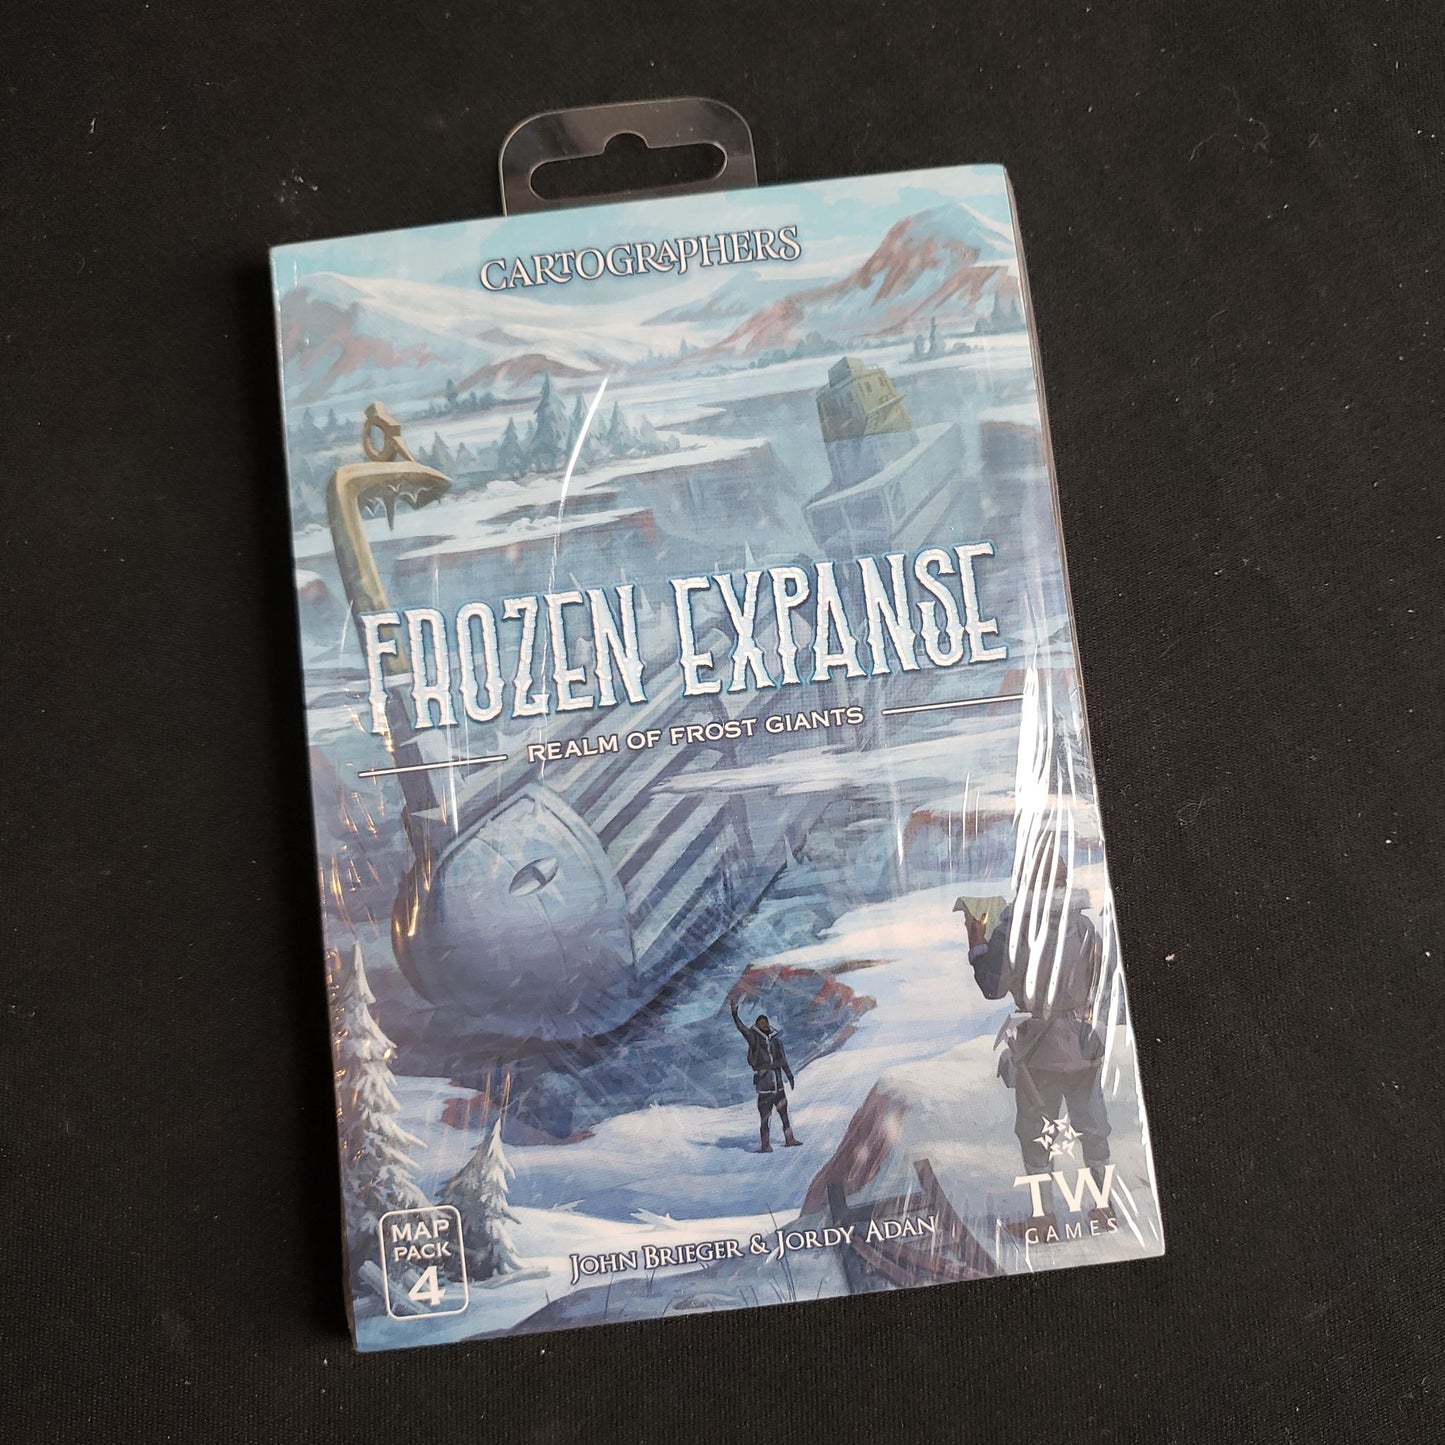 Image shows the front of the package for the Frozen Expanse expansion for the Cartographers game